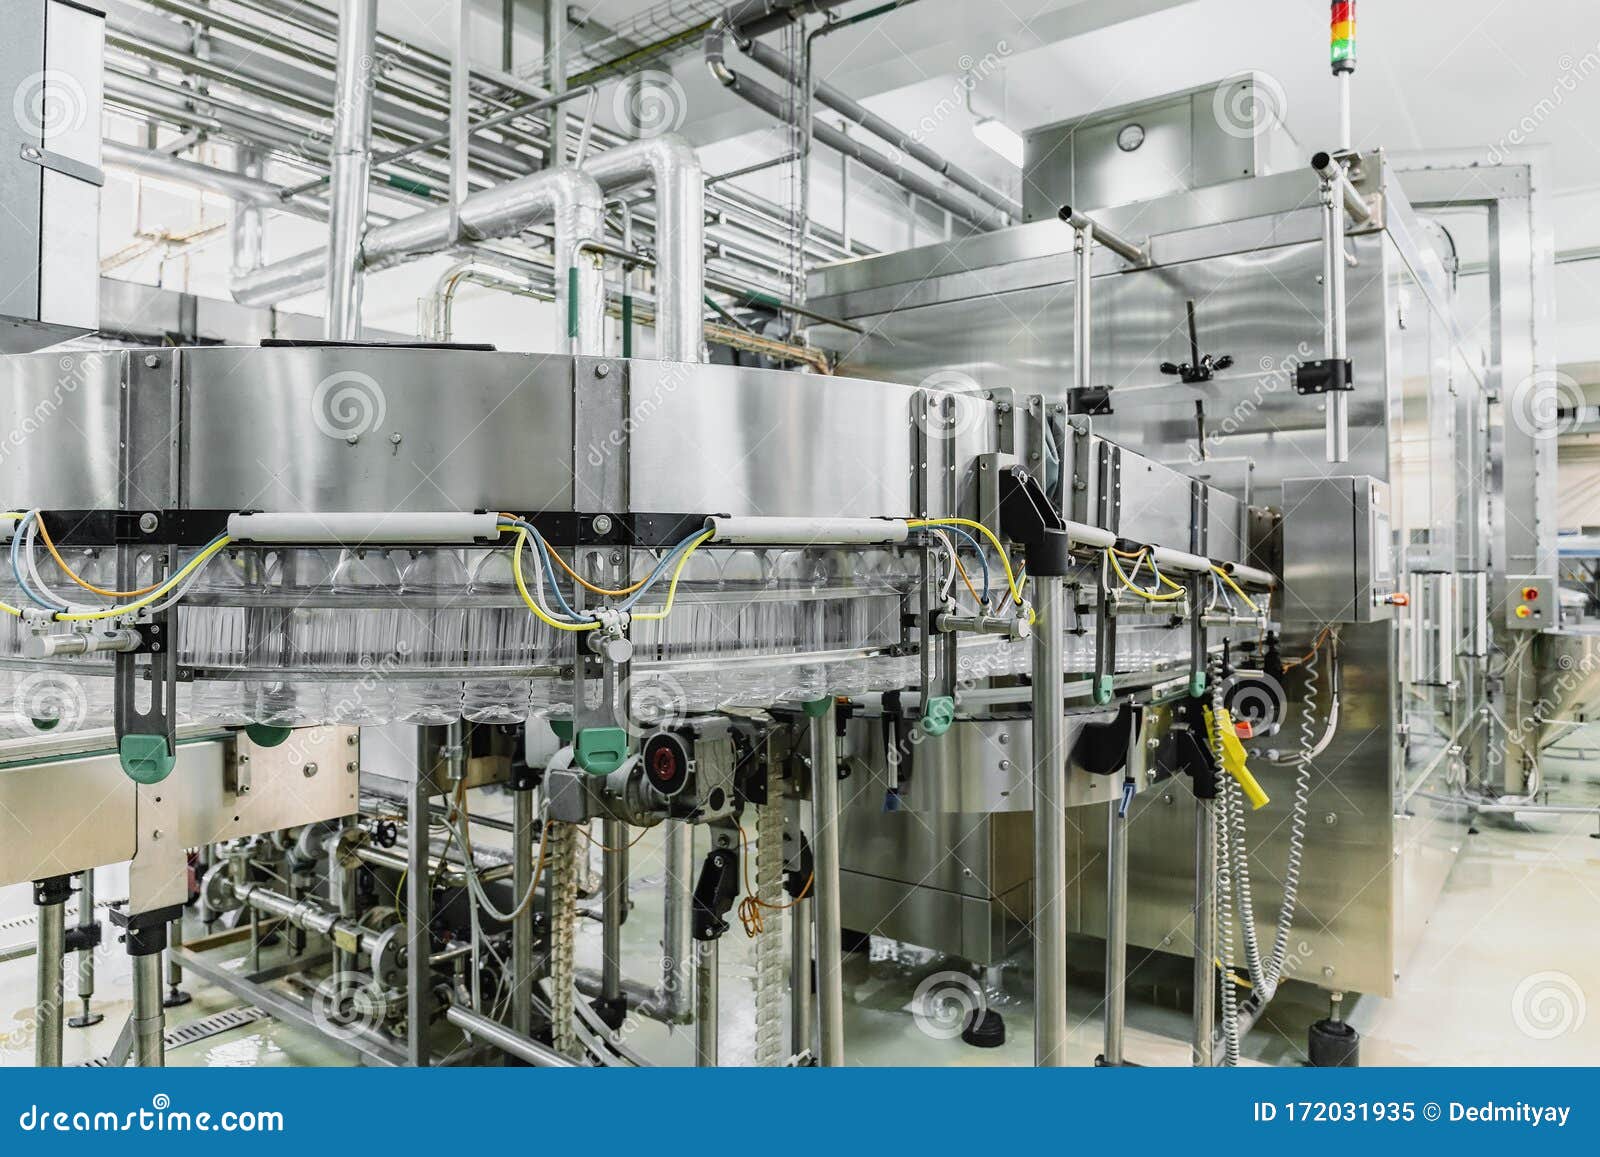 industrial automated machine in beverage plant interior, industry equipment on food factory